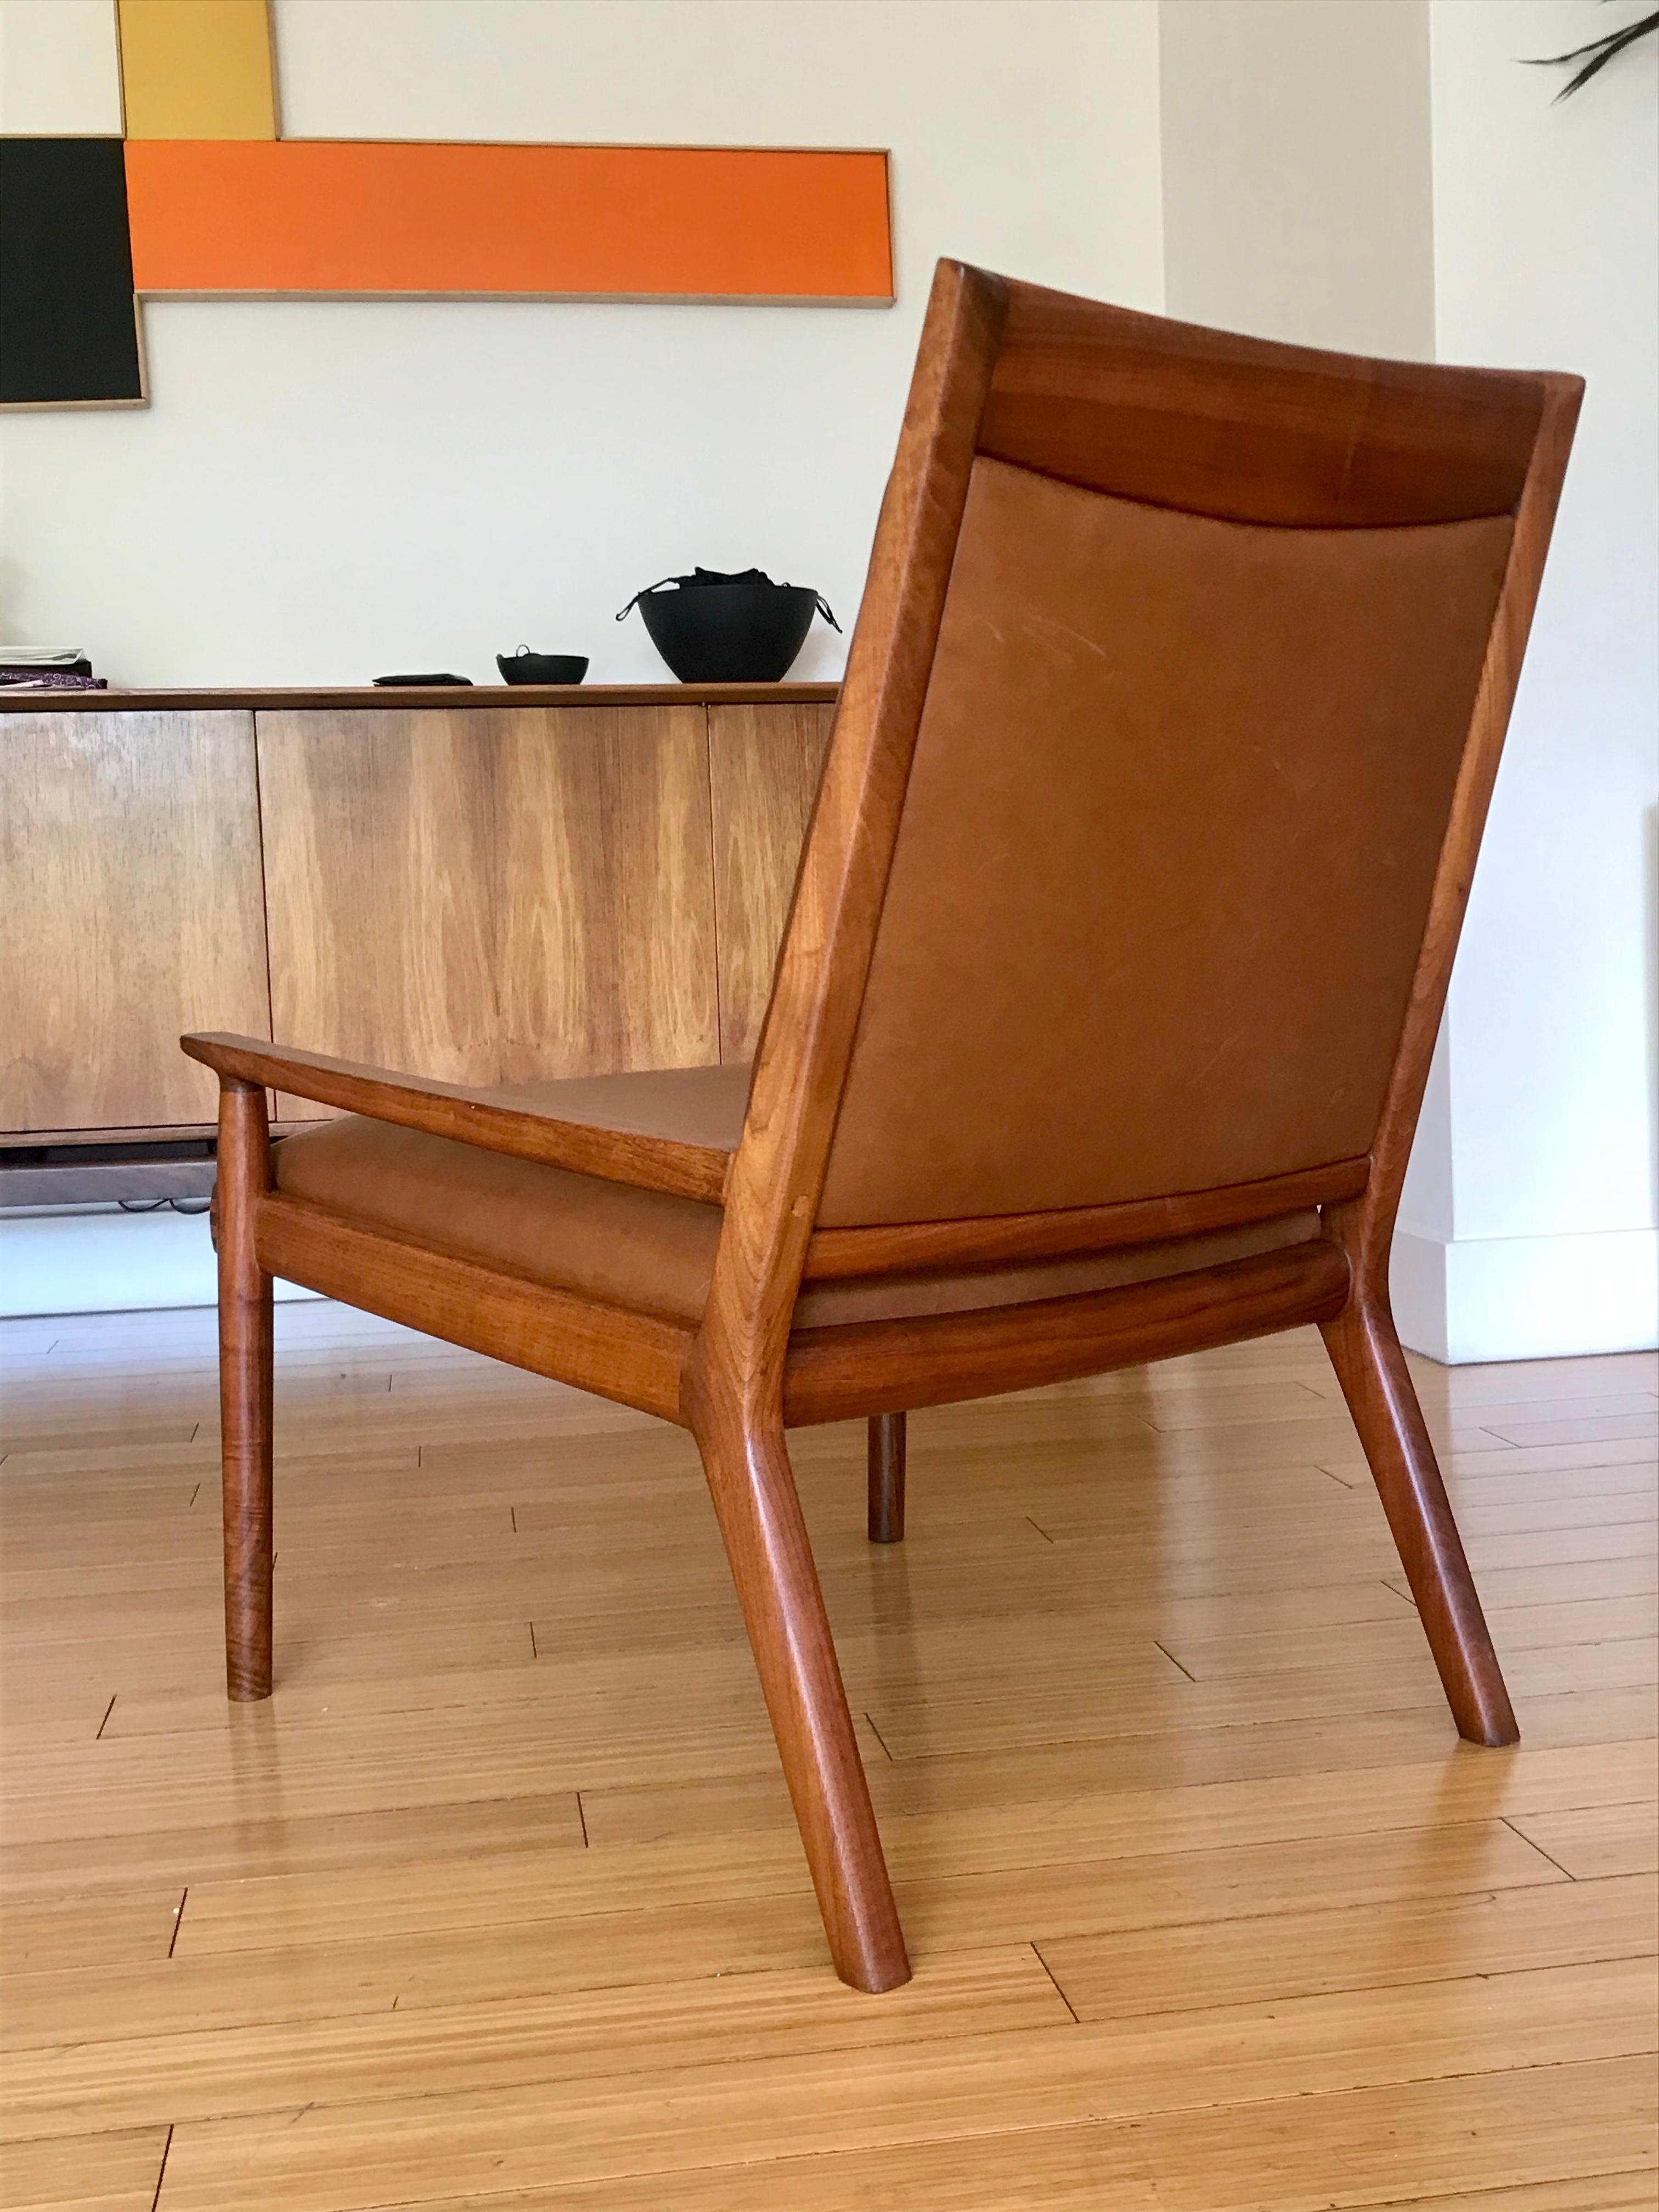 Modern Studio Craft Leather Lounge Chair After Maloof   9